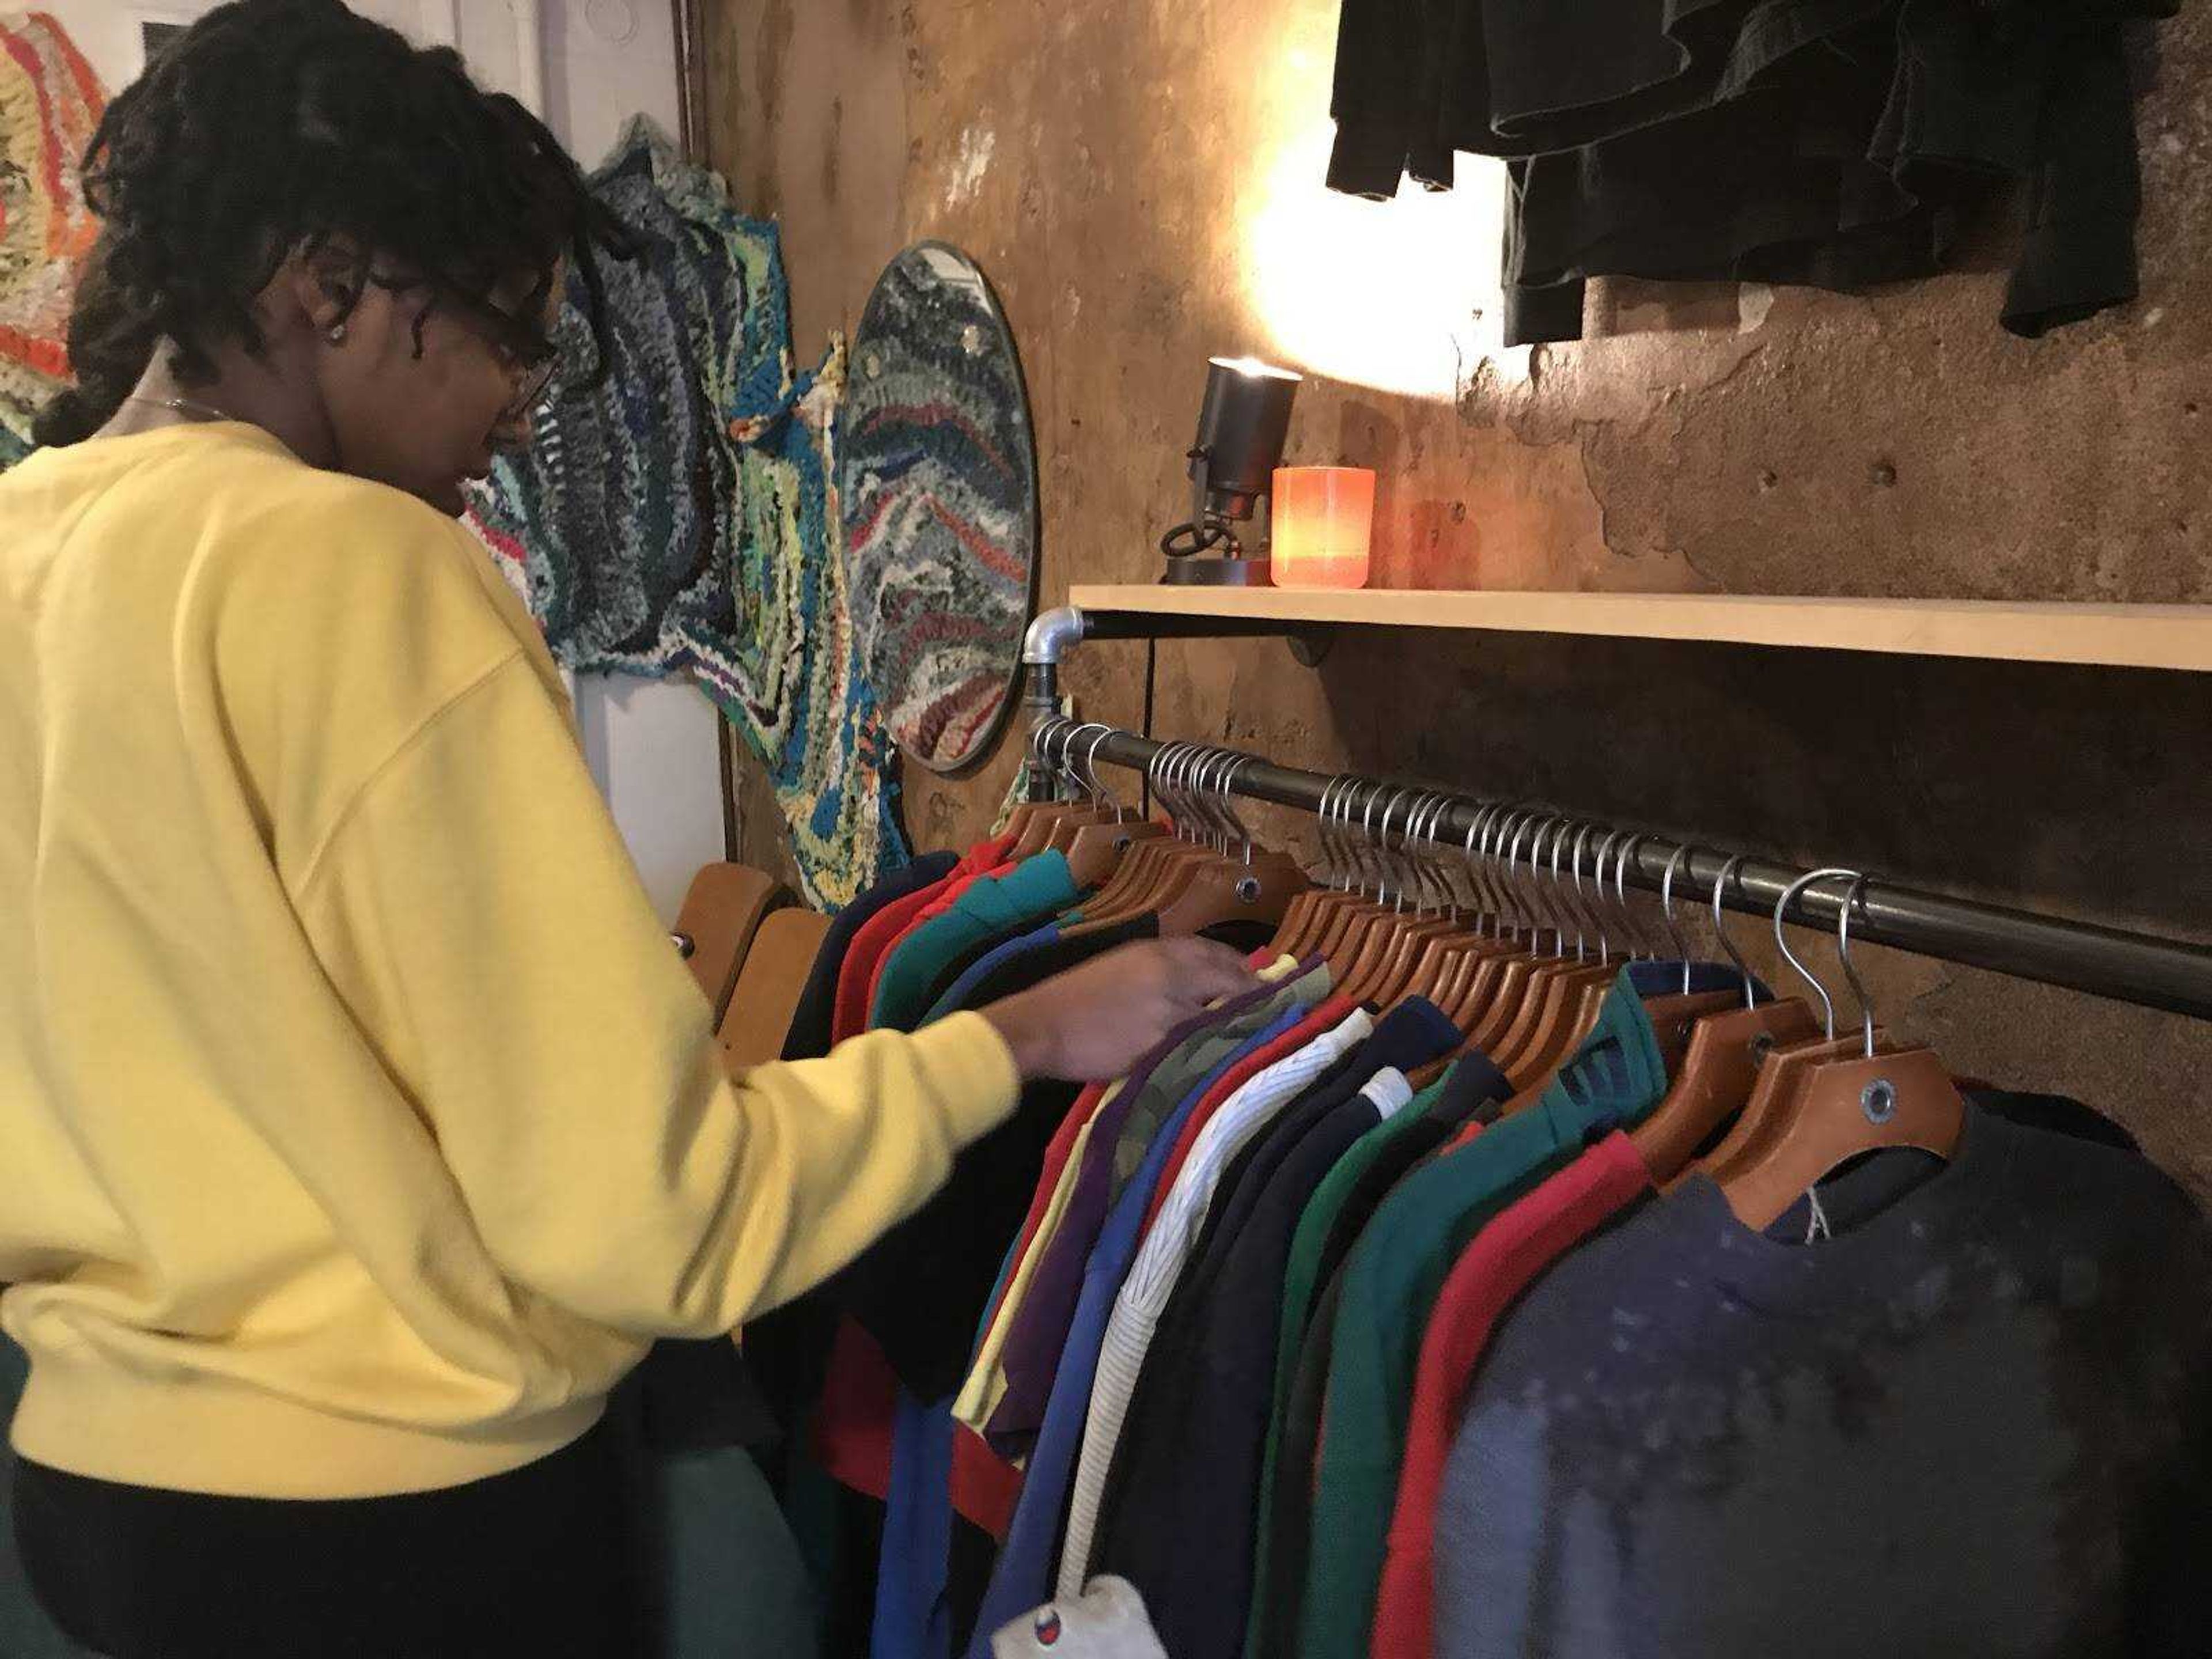 Shoppers at Kith and Kin browse clothing racks during the Feb. 7 pop up shop featuring The Flower Boys Brand and Pocket Change Denim.